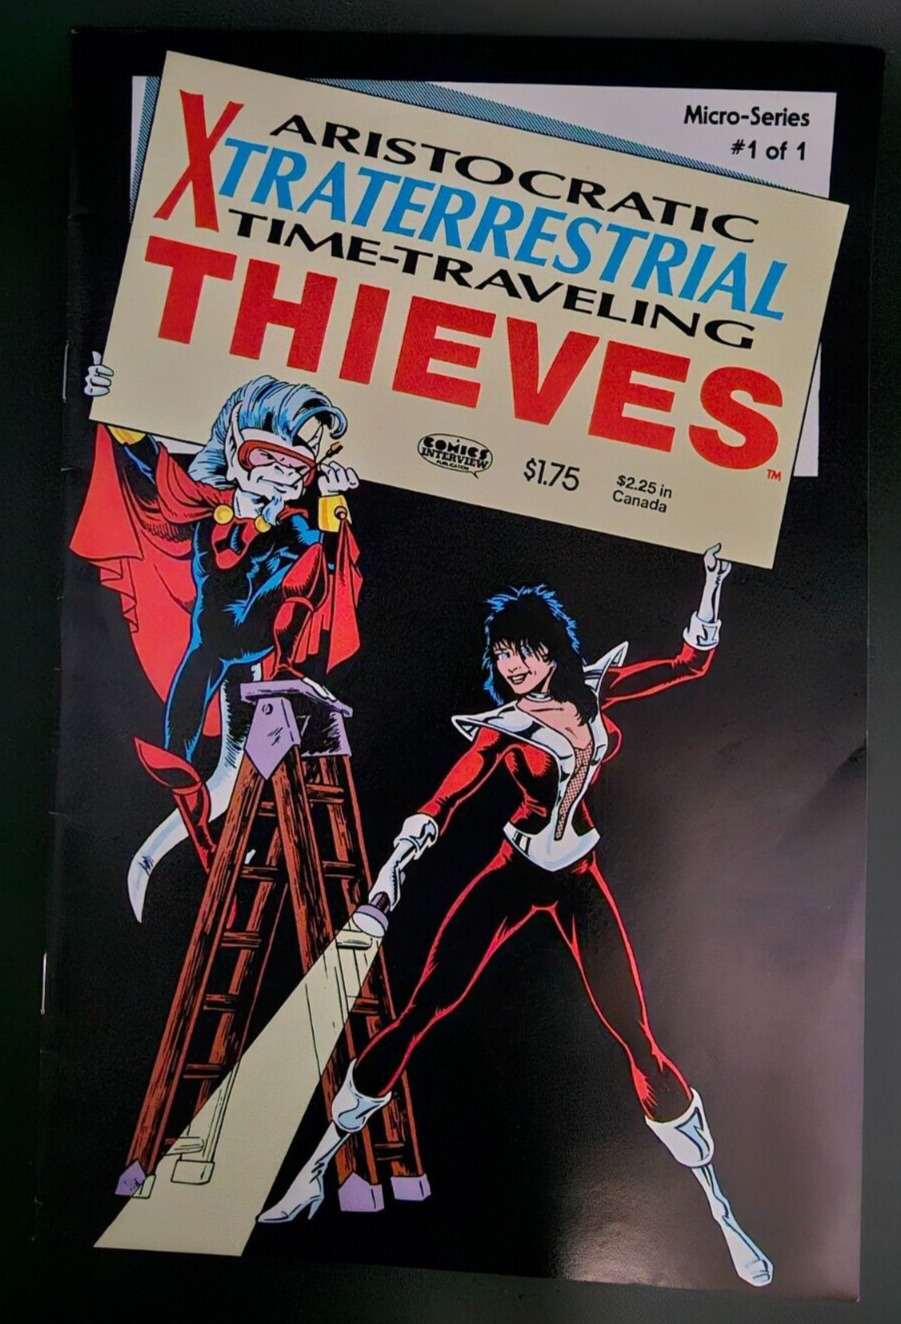 ARISTOCRATIC XTRATERRESTRIAL TIME TRAVELING THIEVES  \'86 RAW Comics Interview #1